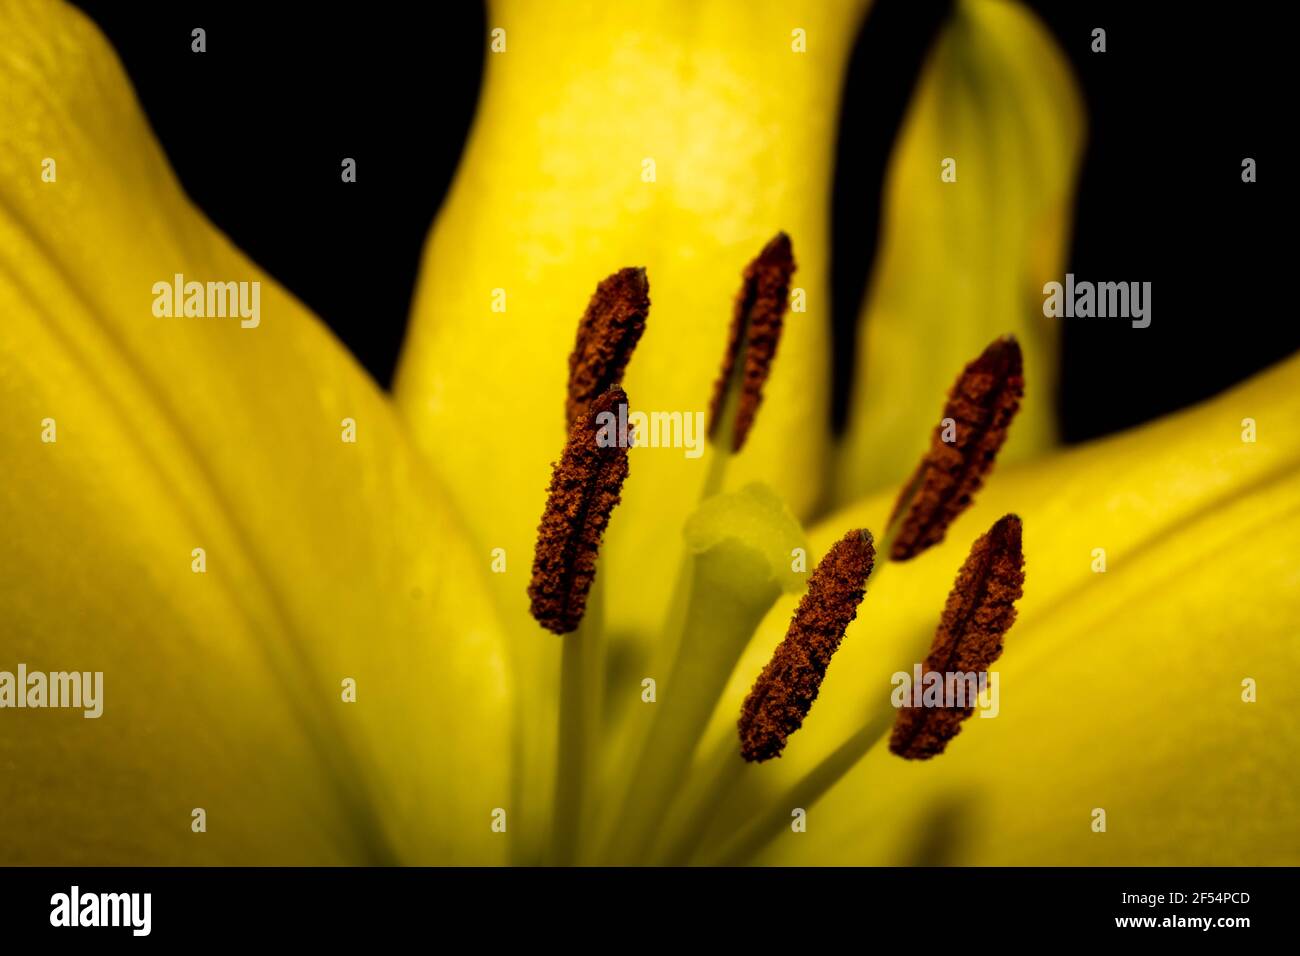 in focus Close up of Yellow Lily in bloom opened up on black background fresh scent and pollen can be seen on six buds, poster, still life nature. Stock Photo